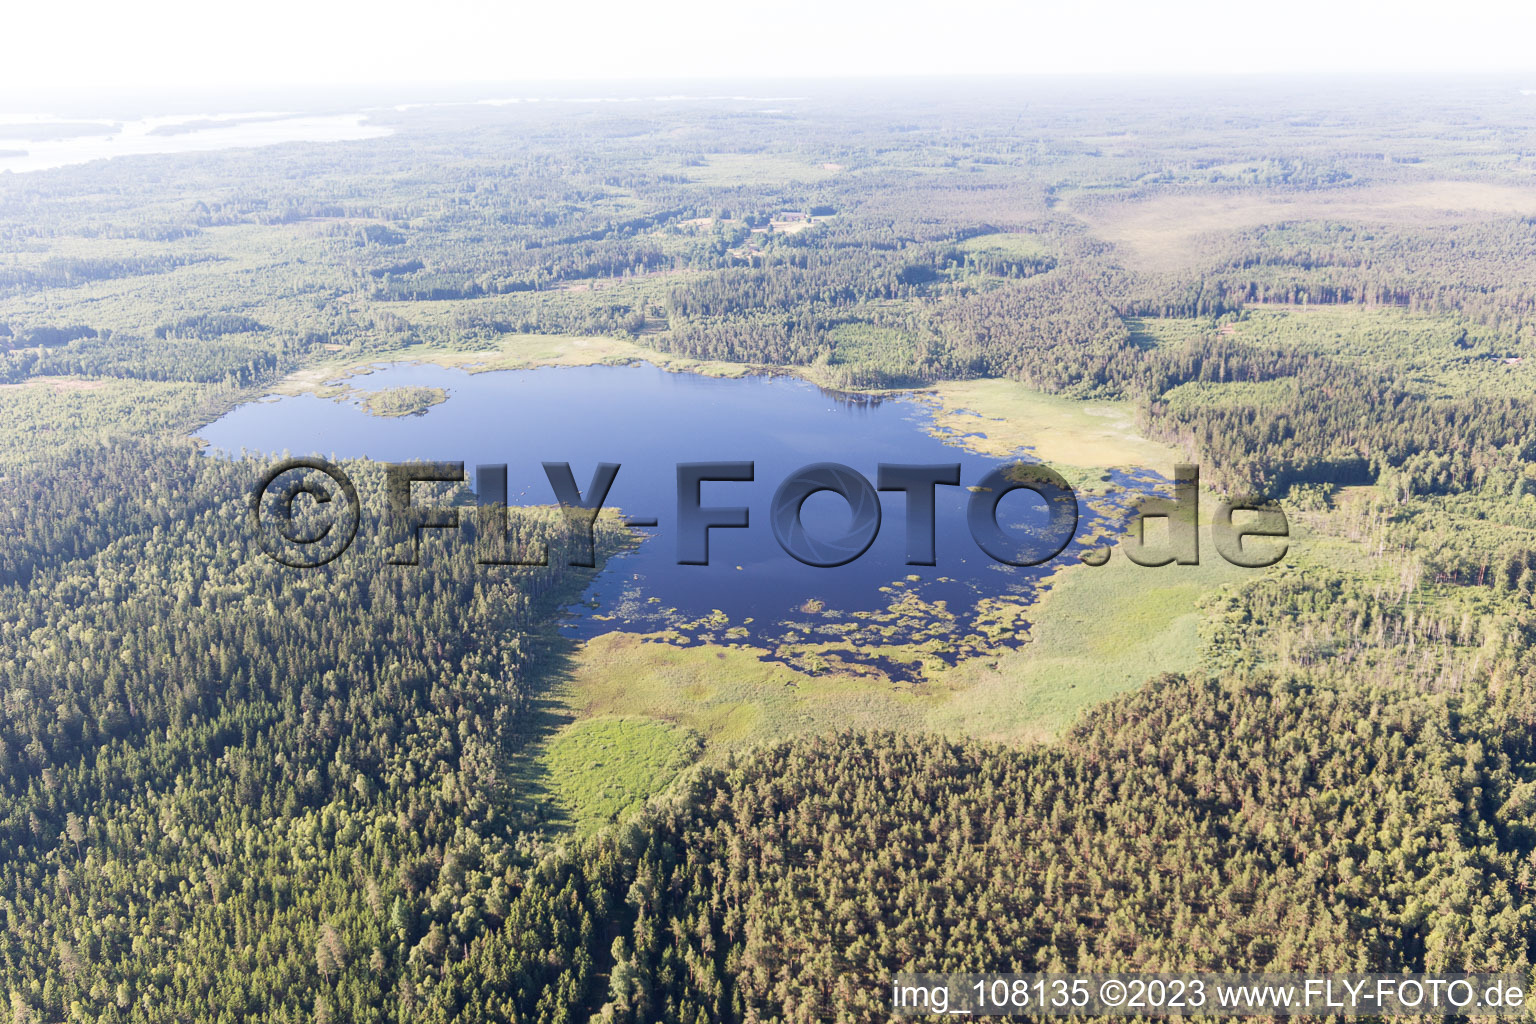 Aerial photograpy of Flogmyran in the state Kronoberg, Sweden